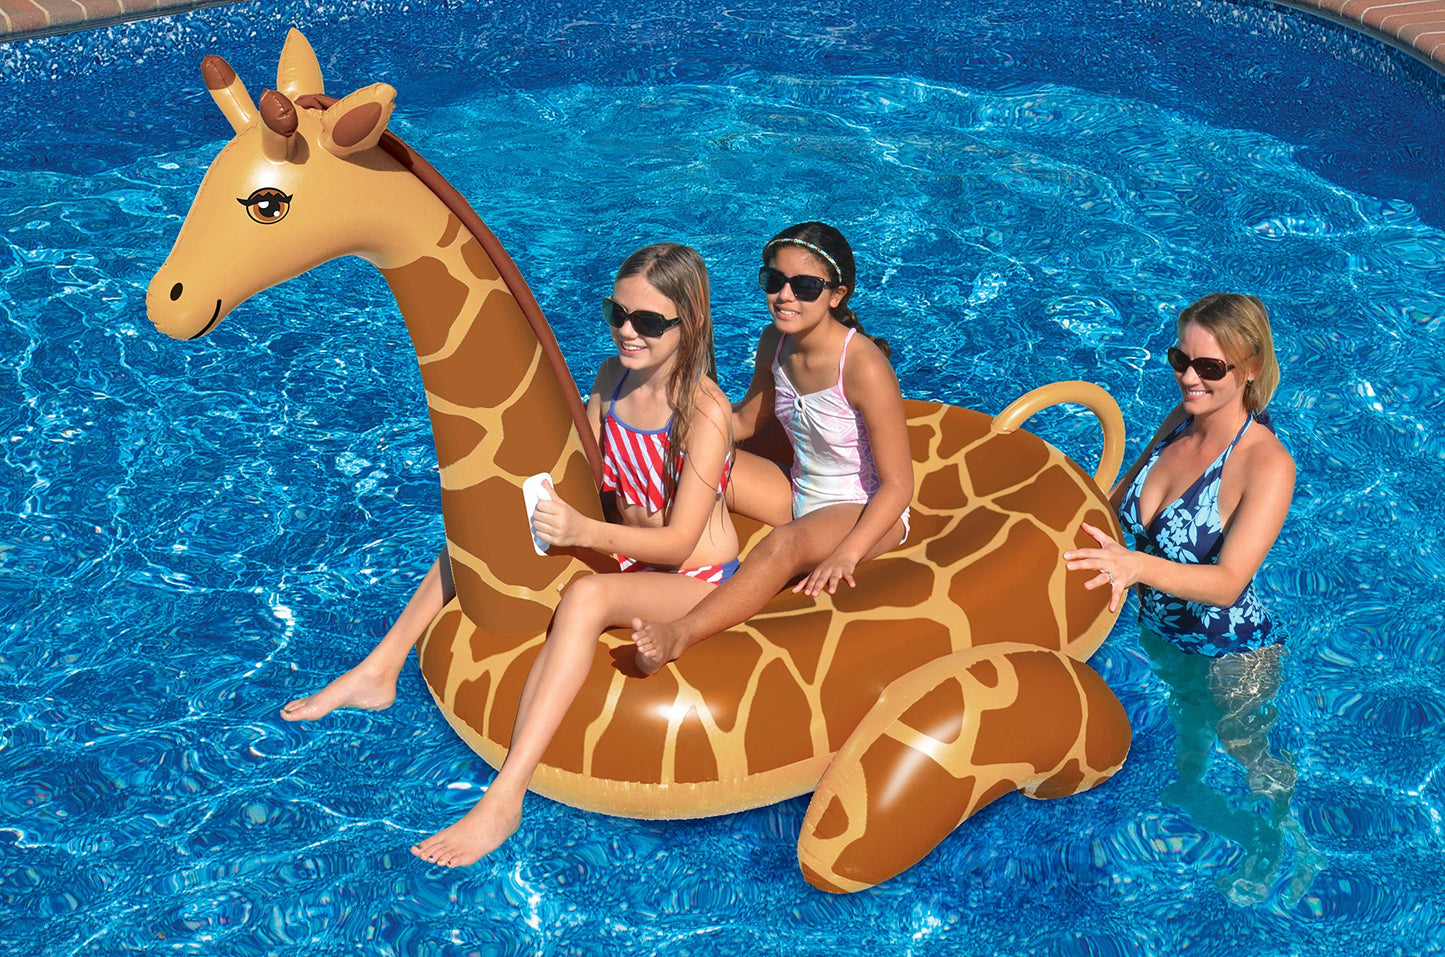 SWIMLINE Original Giant Ride On Inflatable Pool Float Lounge Series | Floaties W/Stable Legs Wings Large Rideable Blow Up Summer Beach Swimming Party Big Raft Tube Decoration Tan Toys for Kids Adults Giraffe